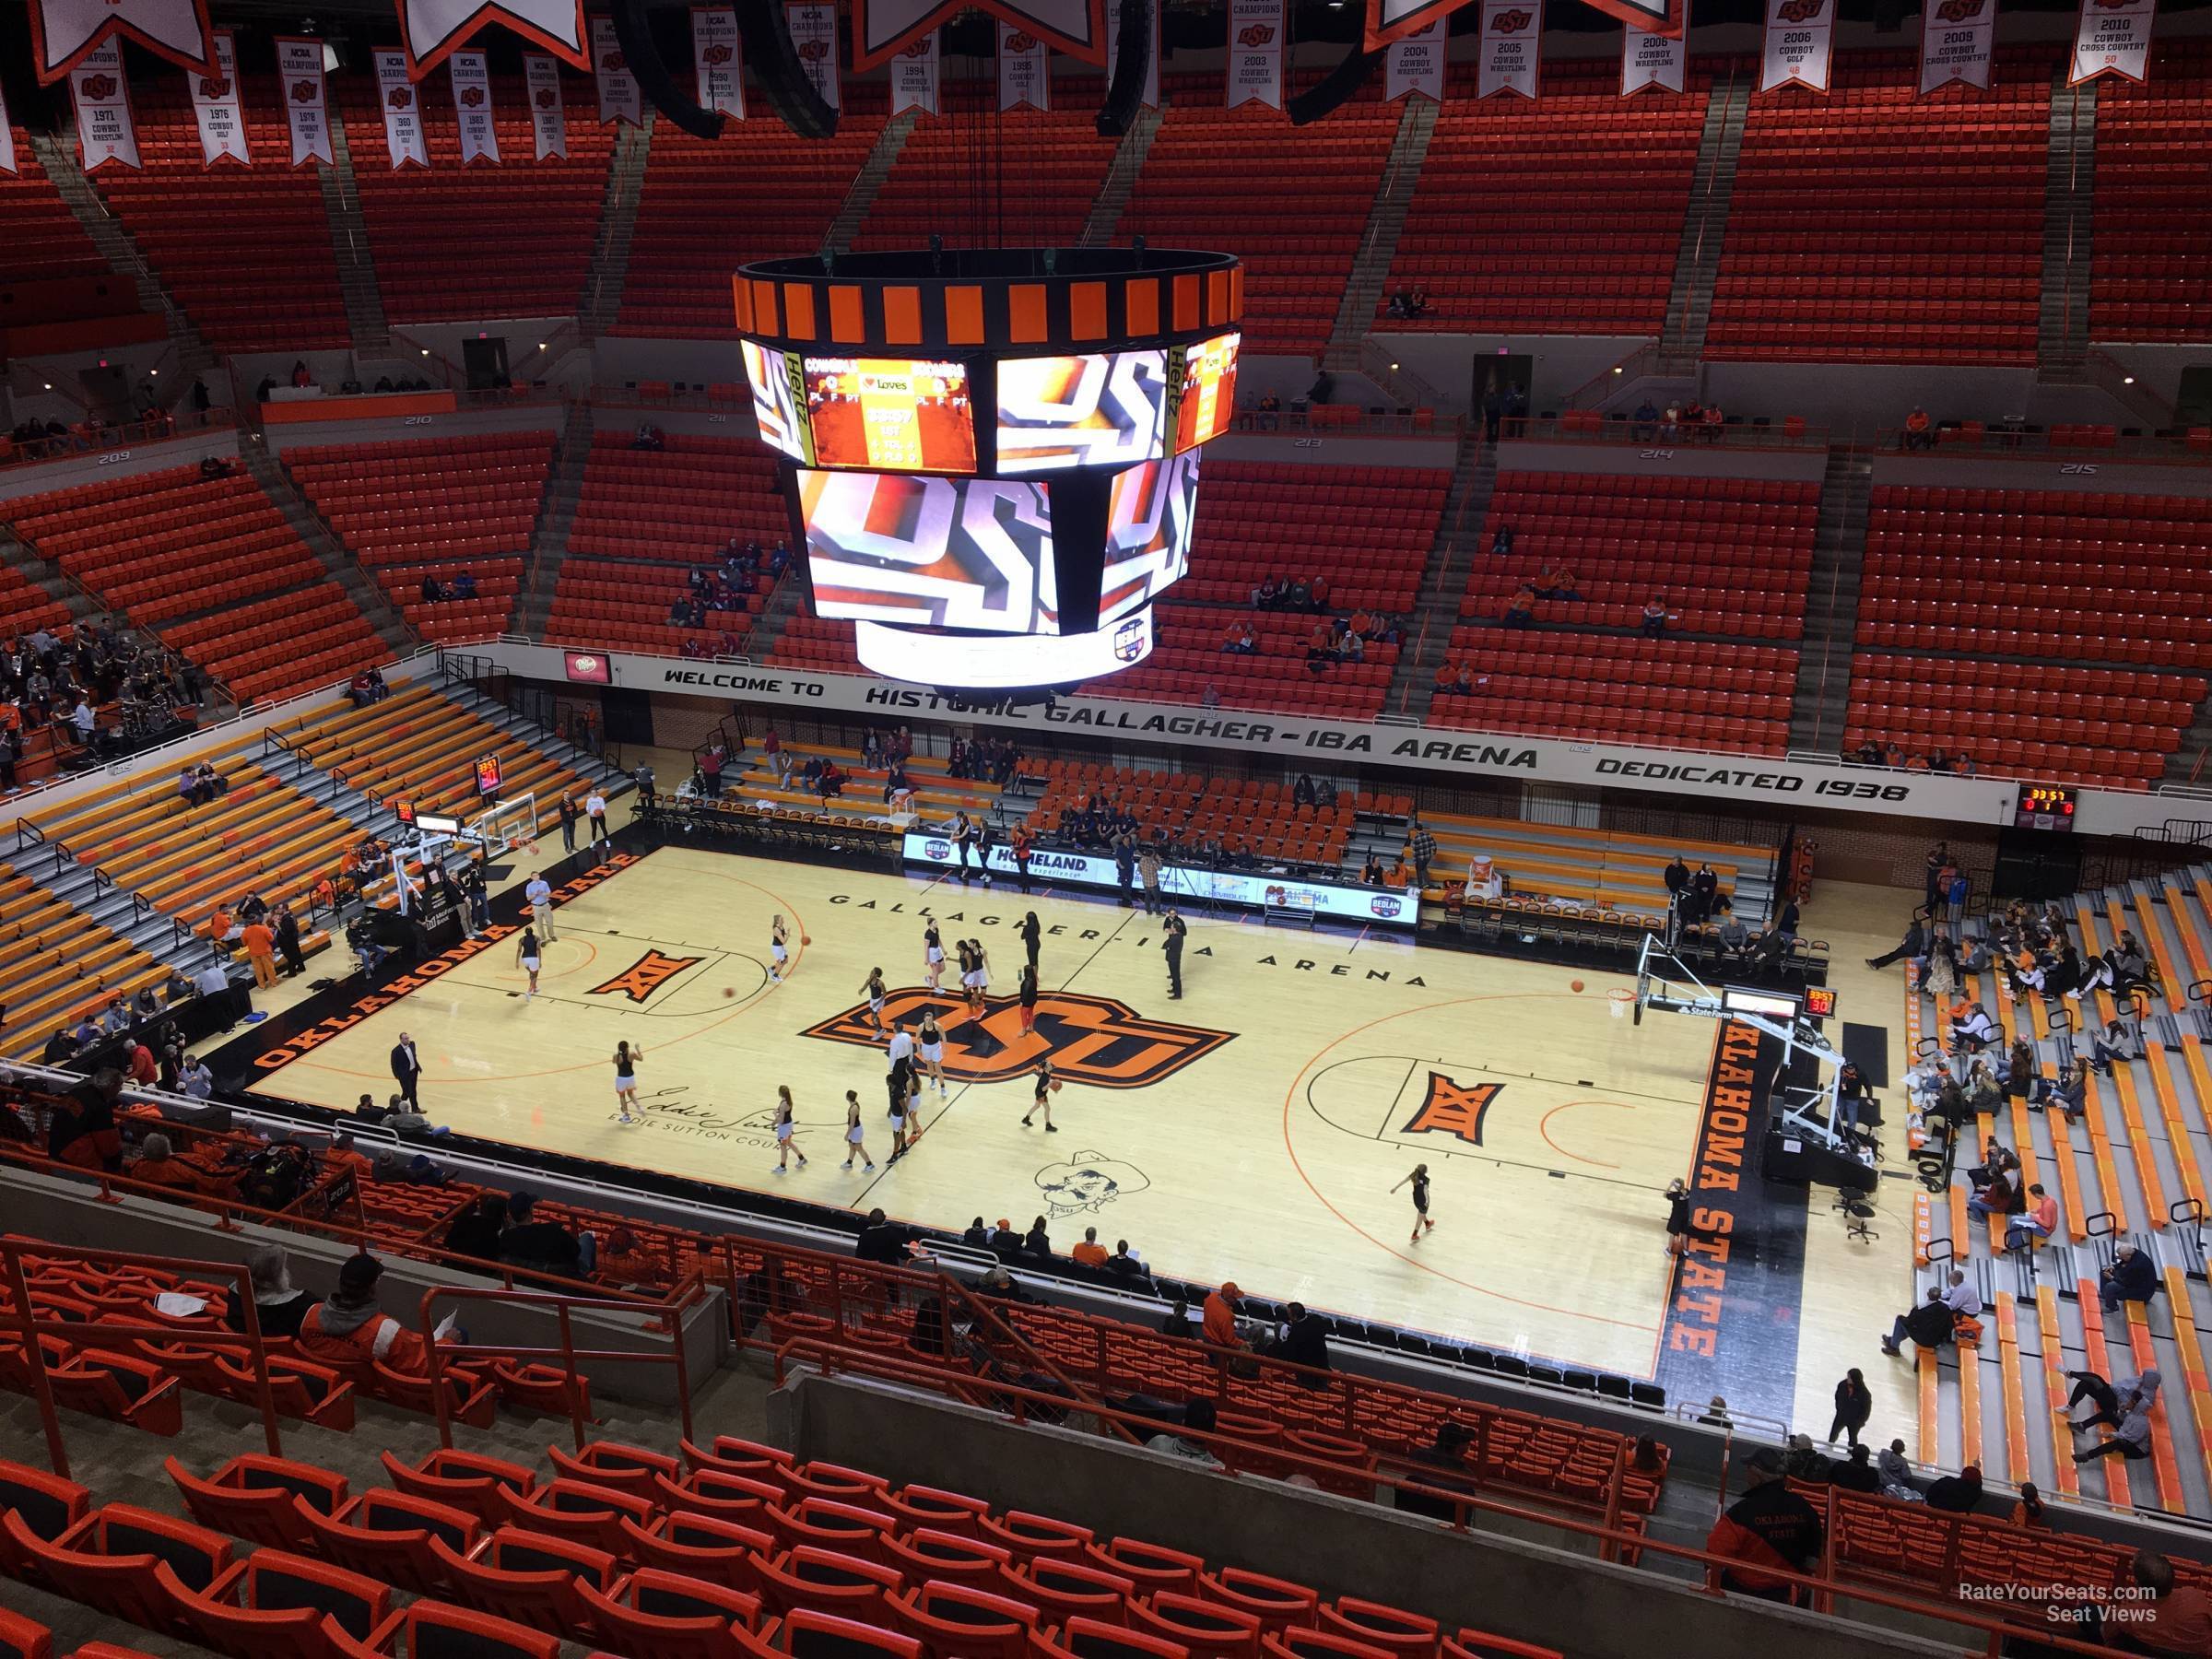 section 302, row 10 seat view  - gallagher-iba arena